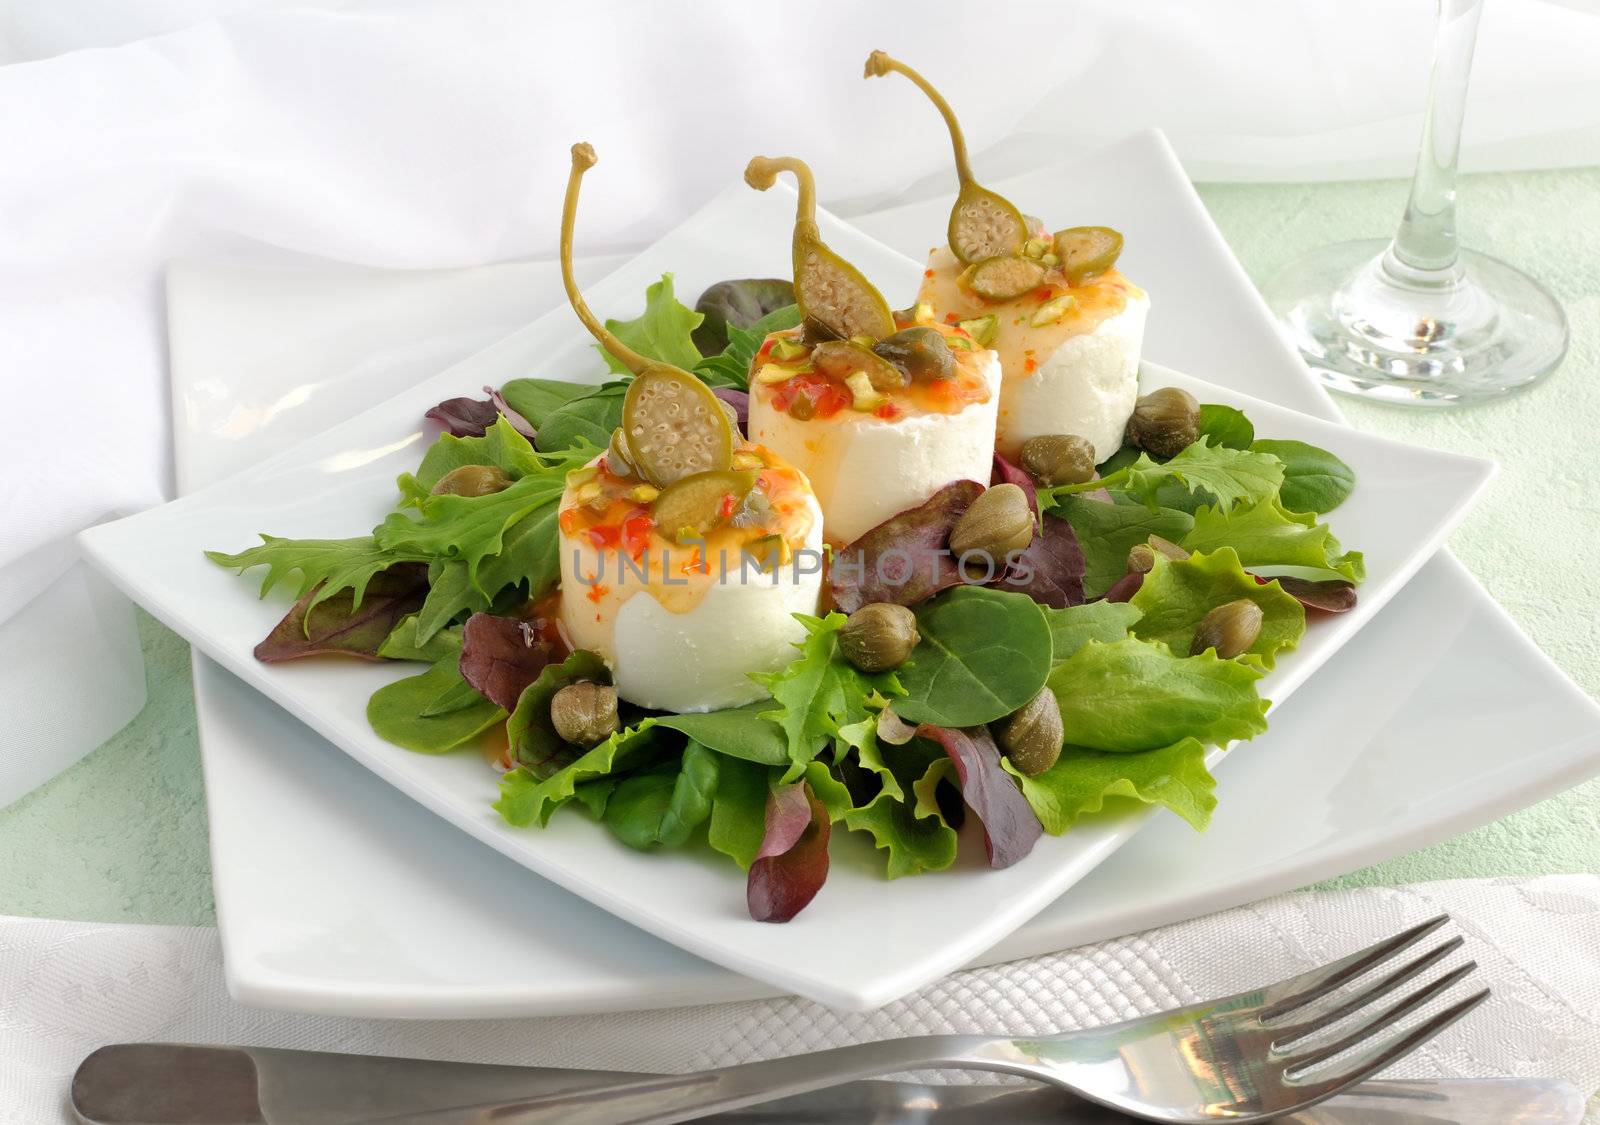 Cheese and capers sweet and sour sauce and pistachios by Apolonia